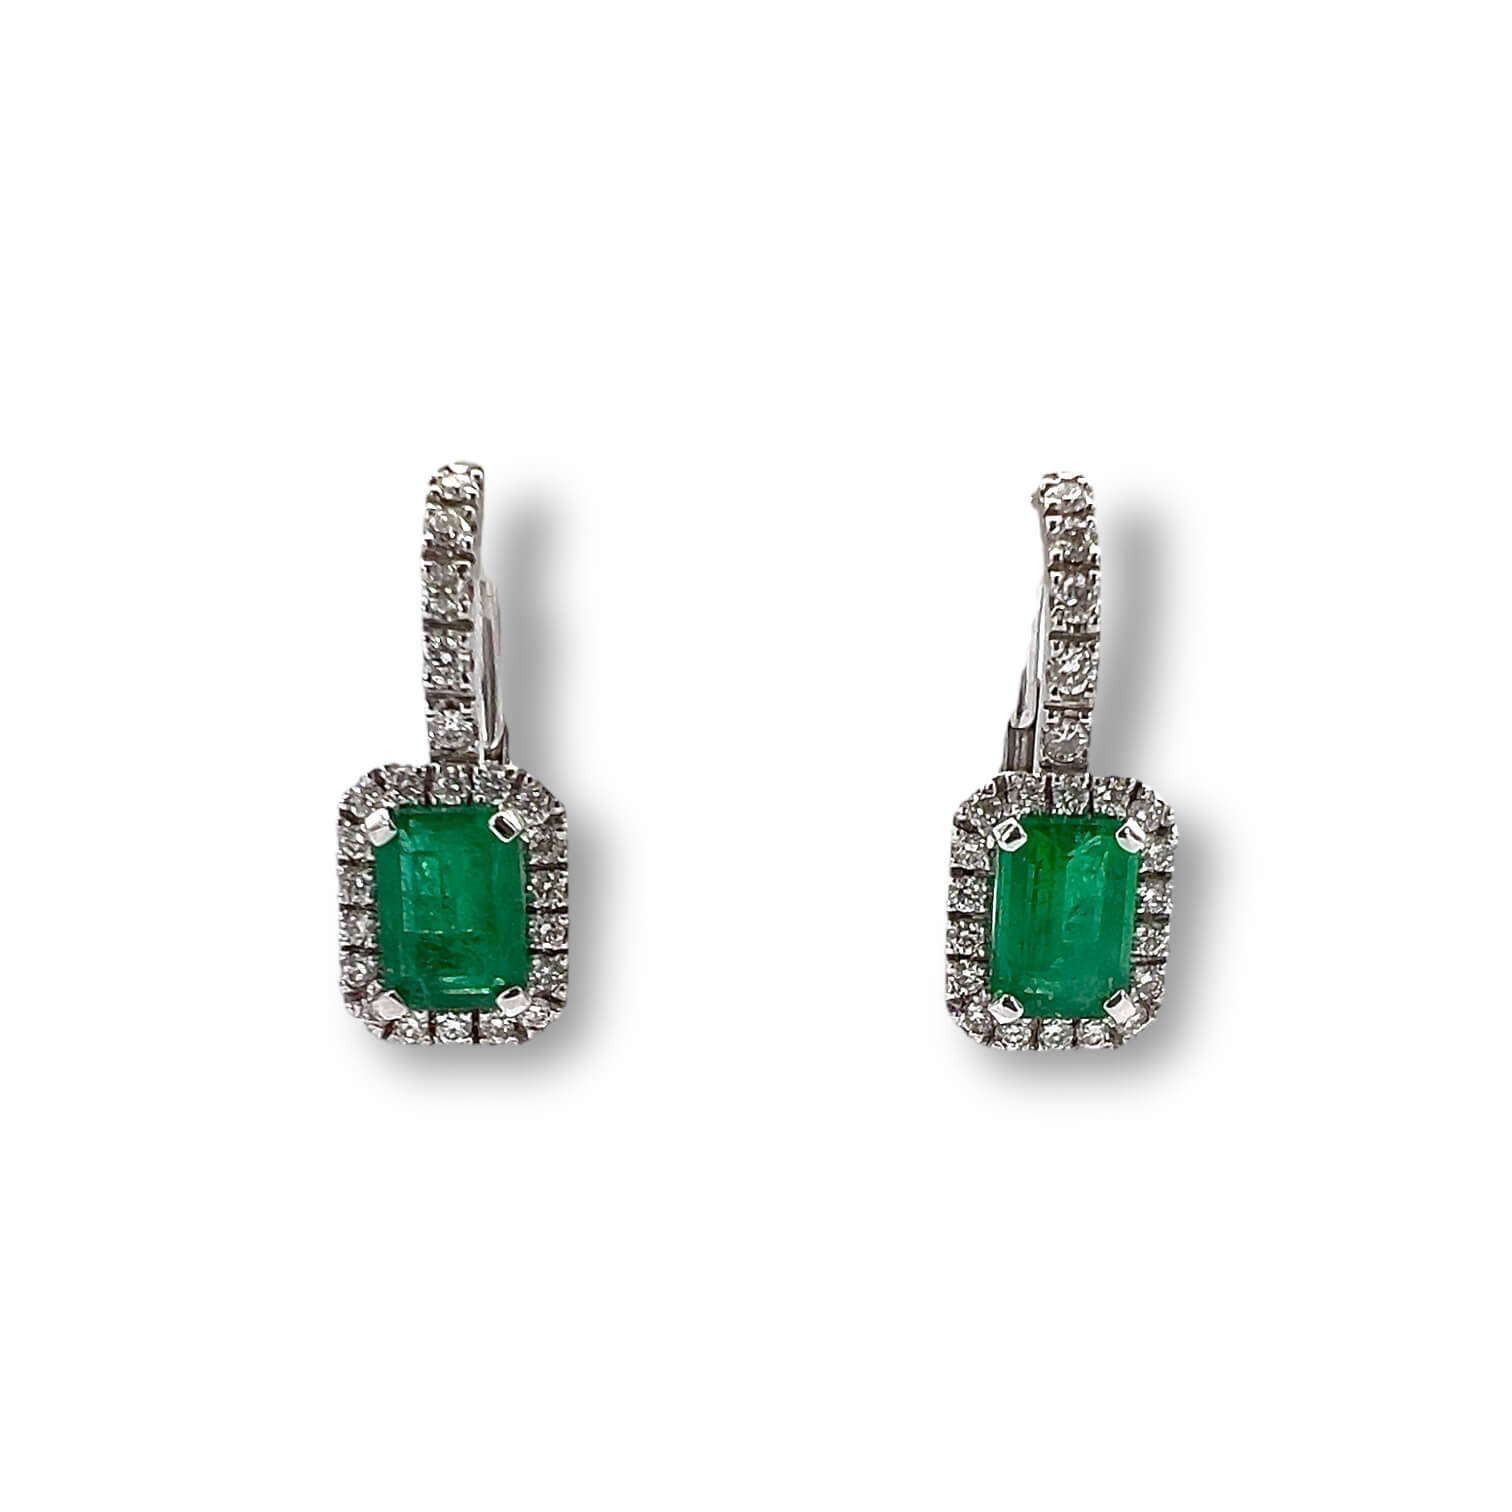 Emerald and diamonds and gold earrings BELLE EPOQUE Art.OR454